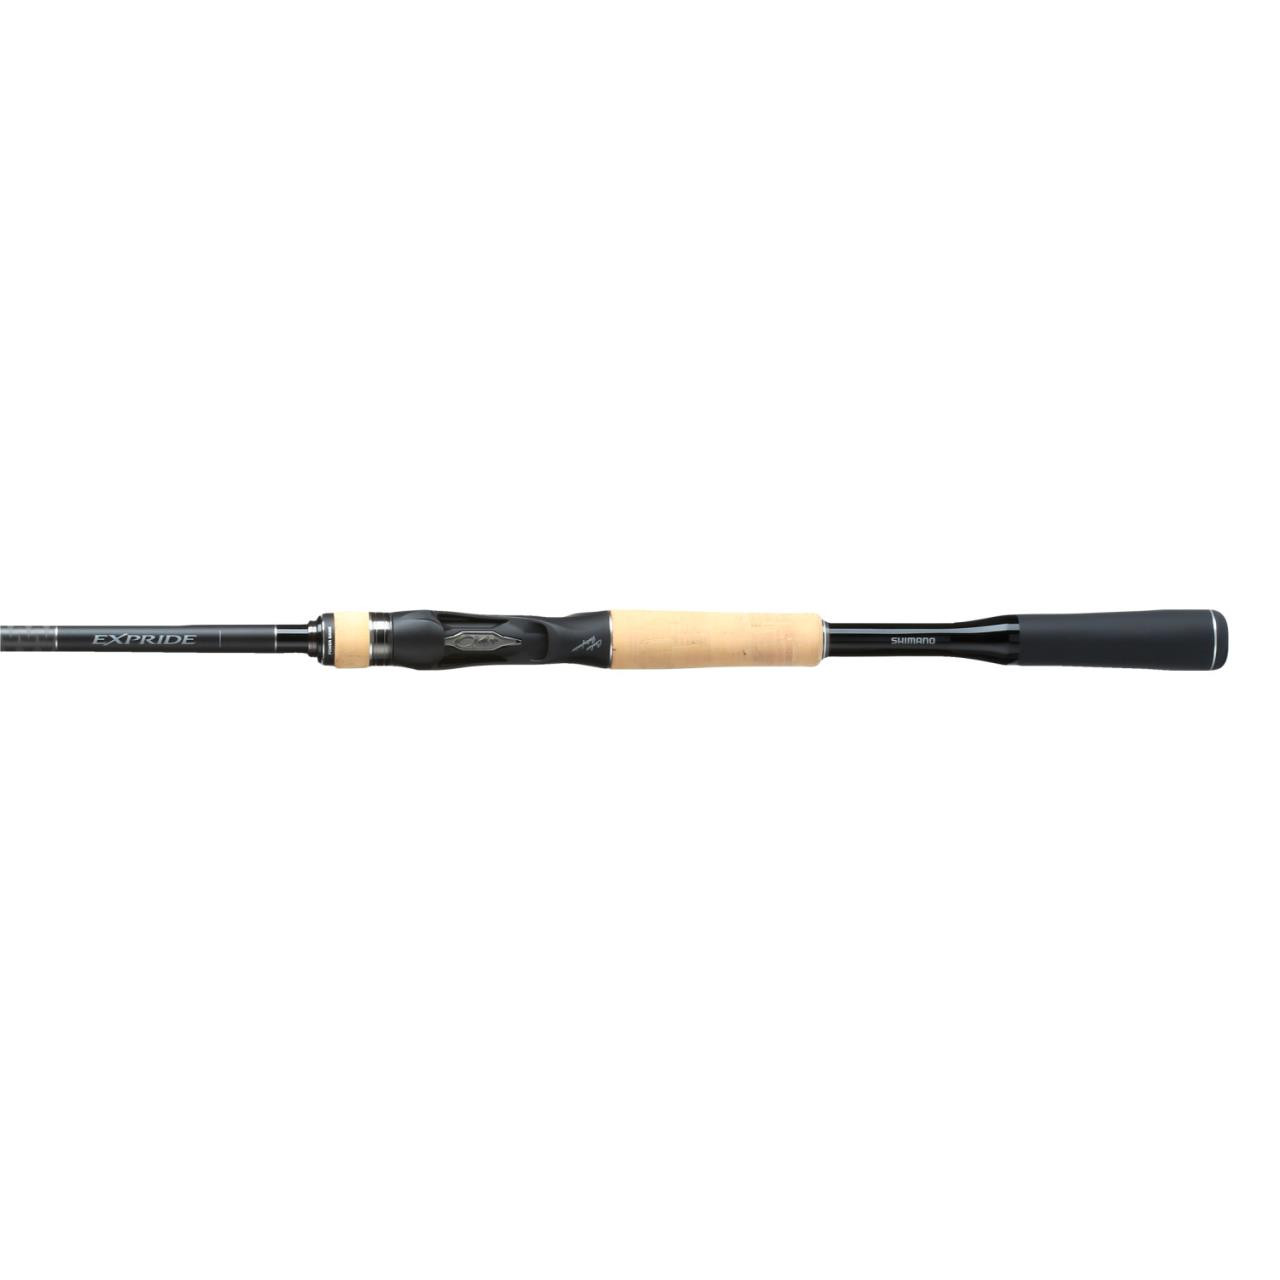 https://cdn11.bigcommerce.com/s-70mih4s/images/stencil/1280x1280/products/22042/58299/Shimano-Expride-B-Baitcaster-Rods-022255269735_image1__50496.1651647846.jpg?c=2